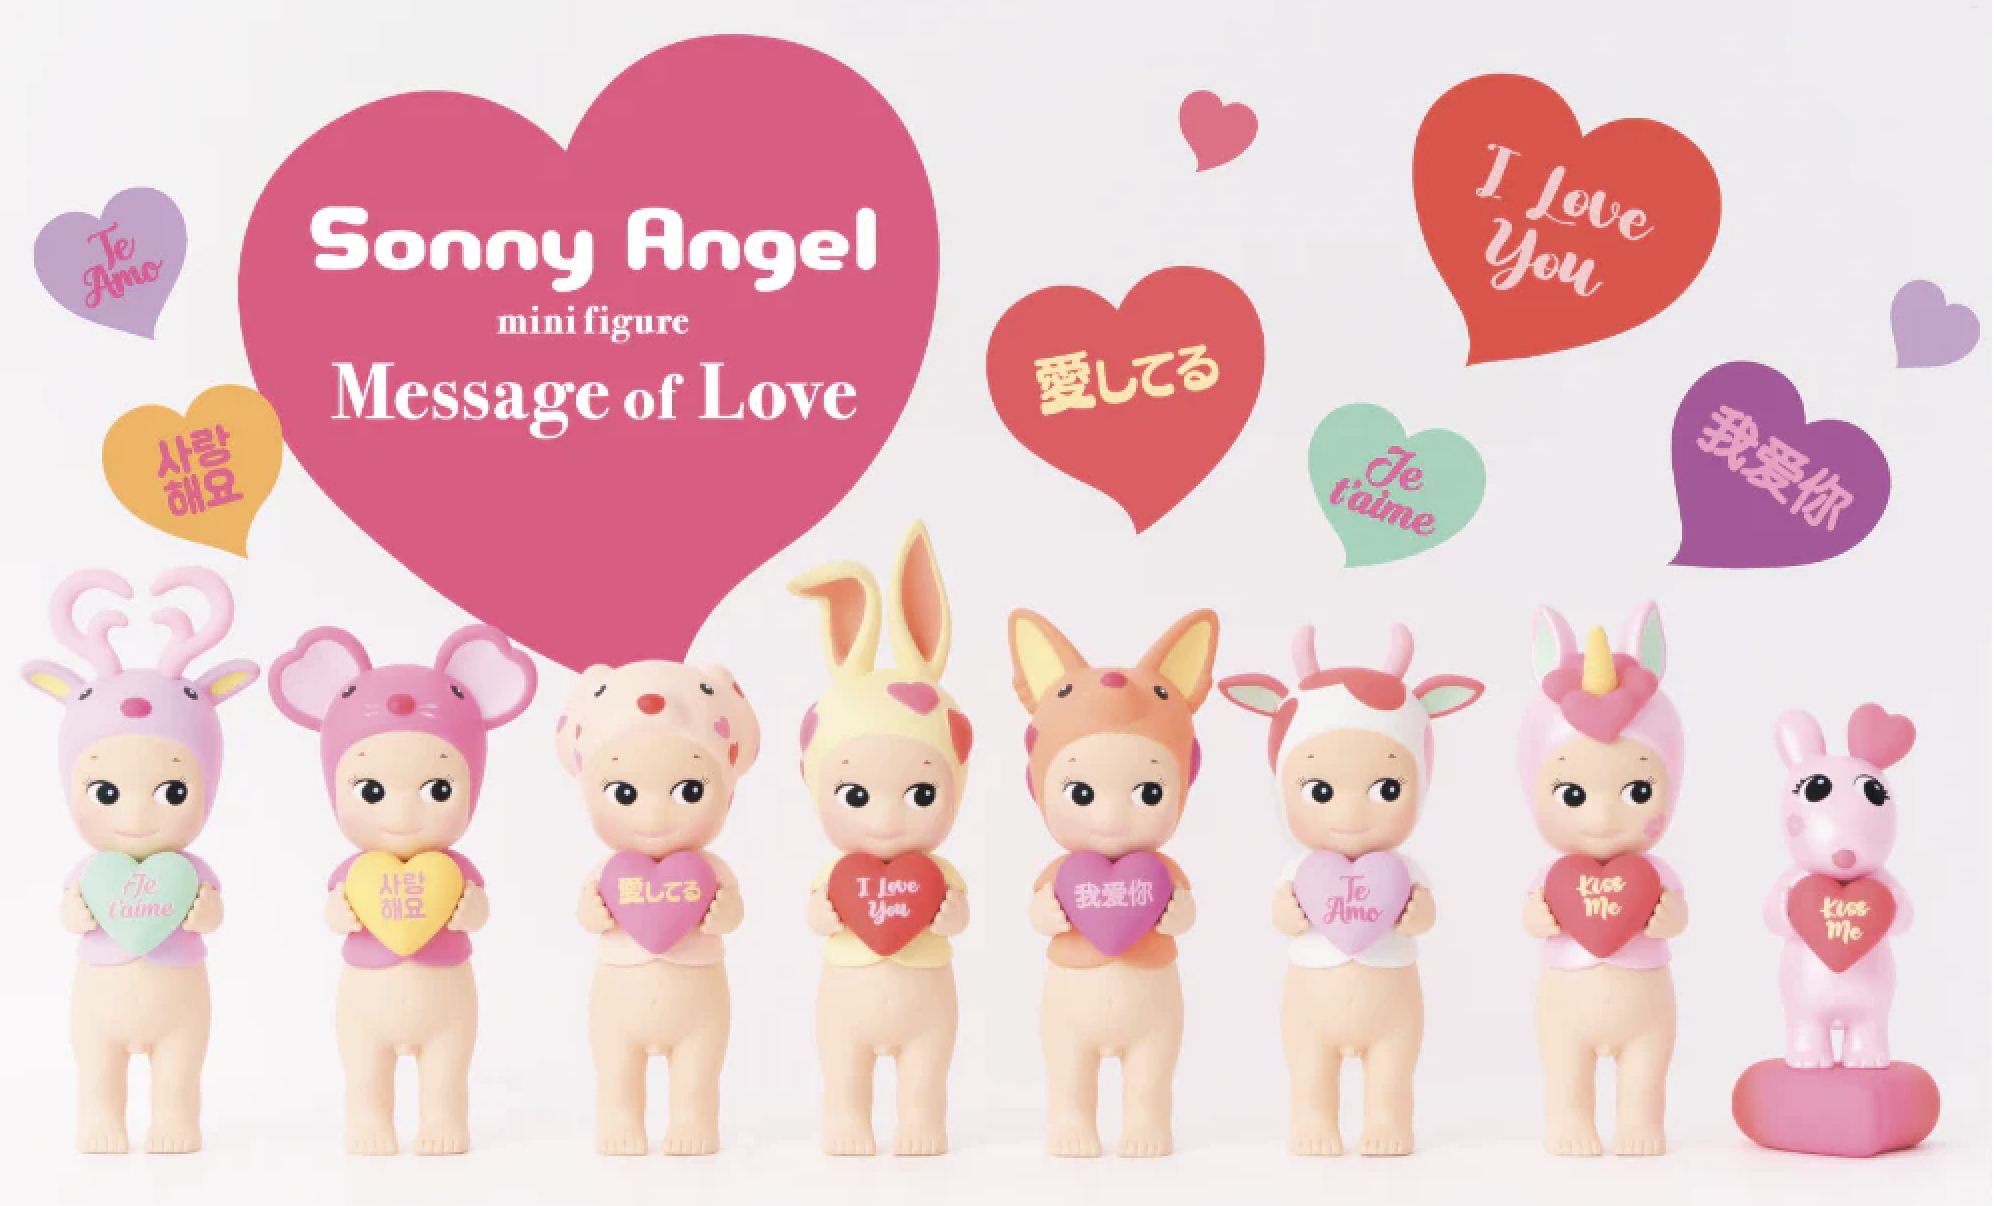 Studio Brillantine - Toronto - Sonny Angel - Christmas OrnamentsStudio Brillantine - Toronto - Sonny Angel - Limited & Special Editions Message of Love